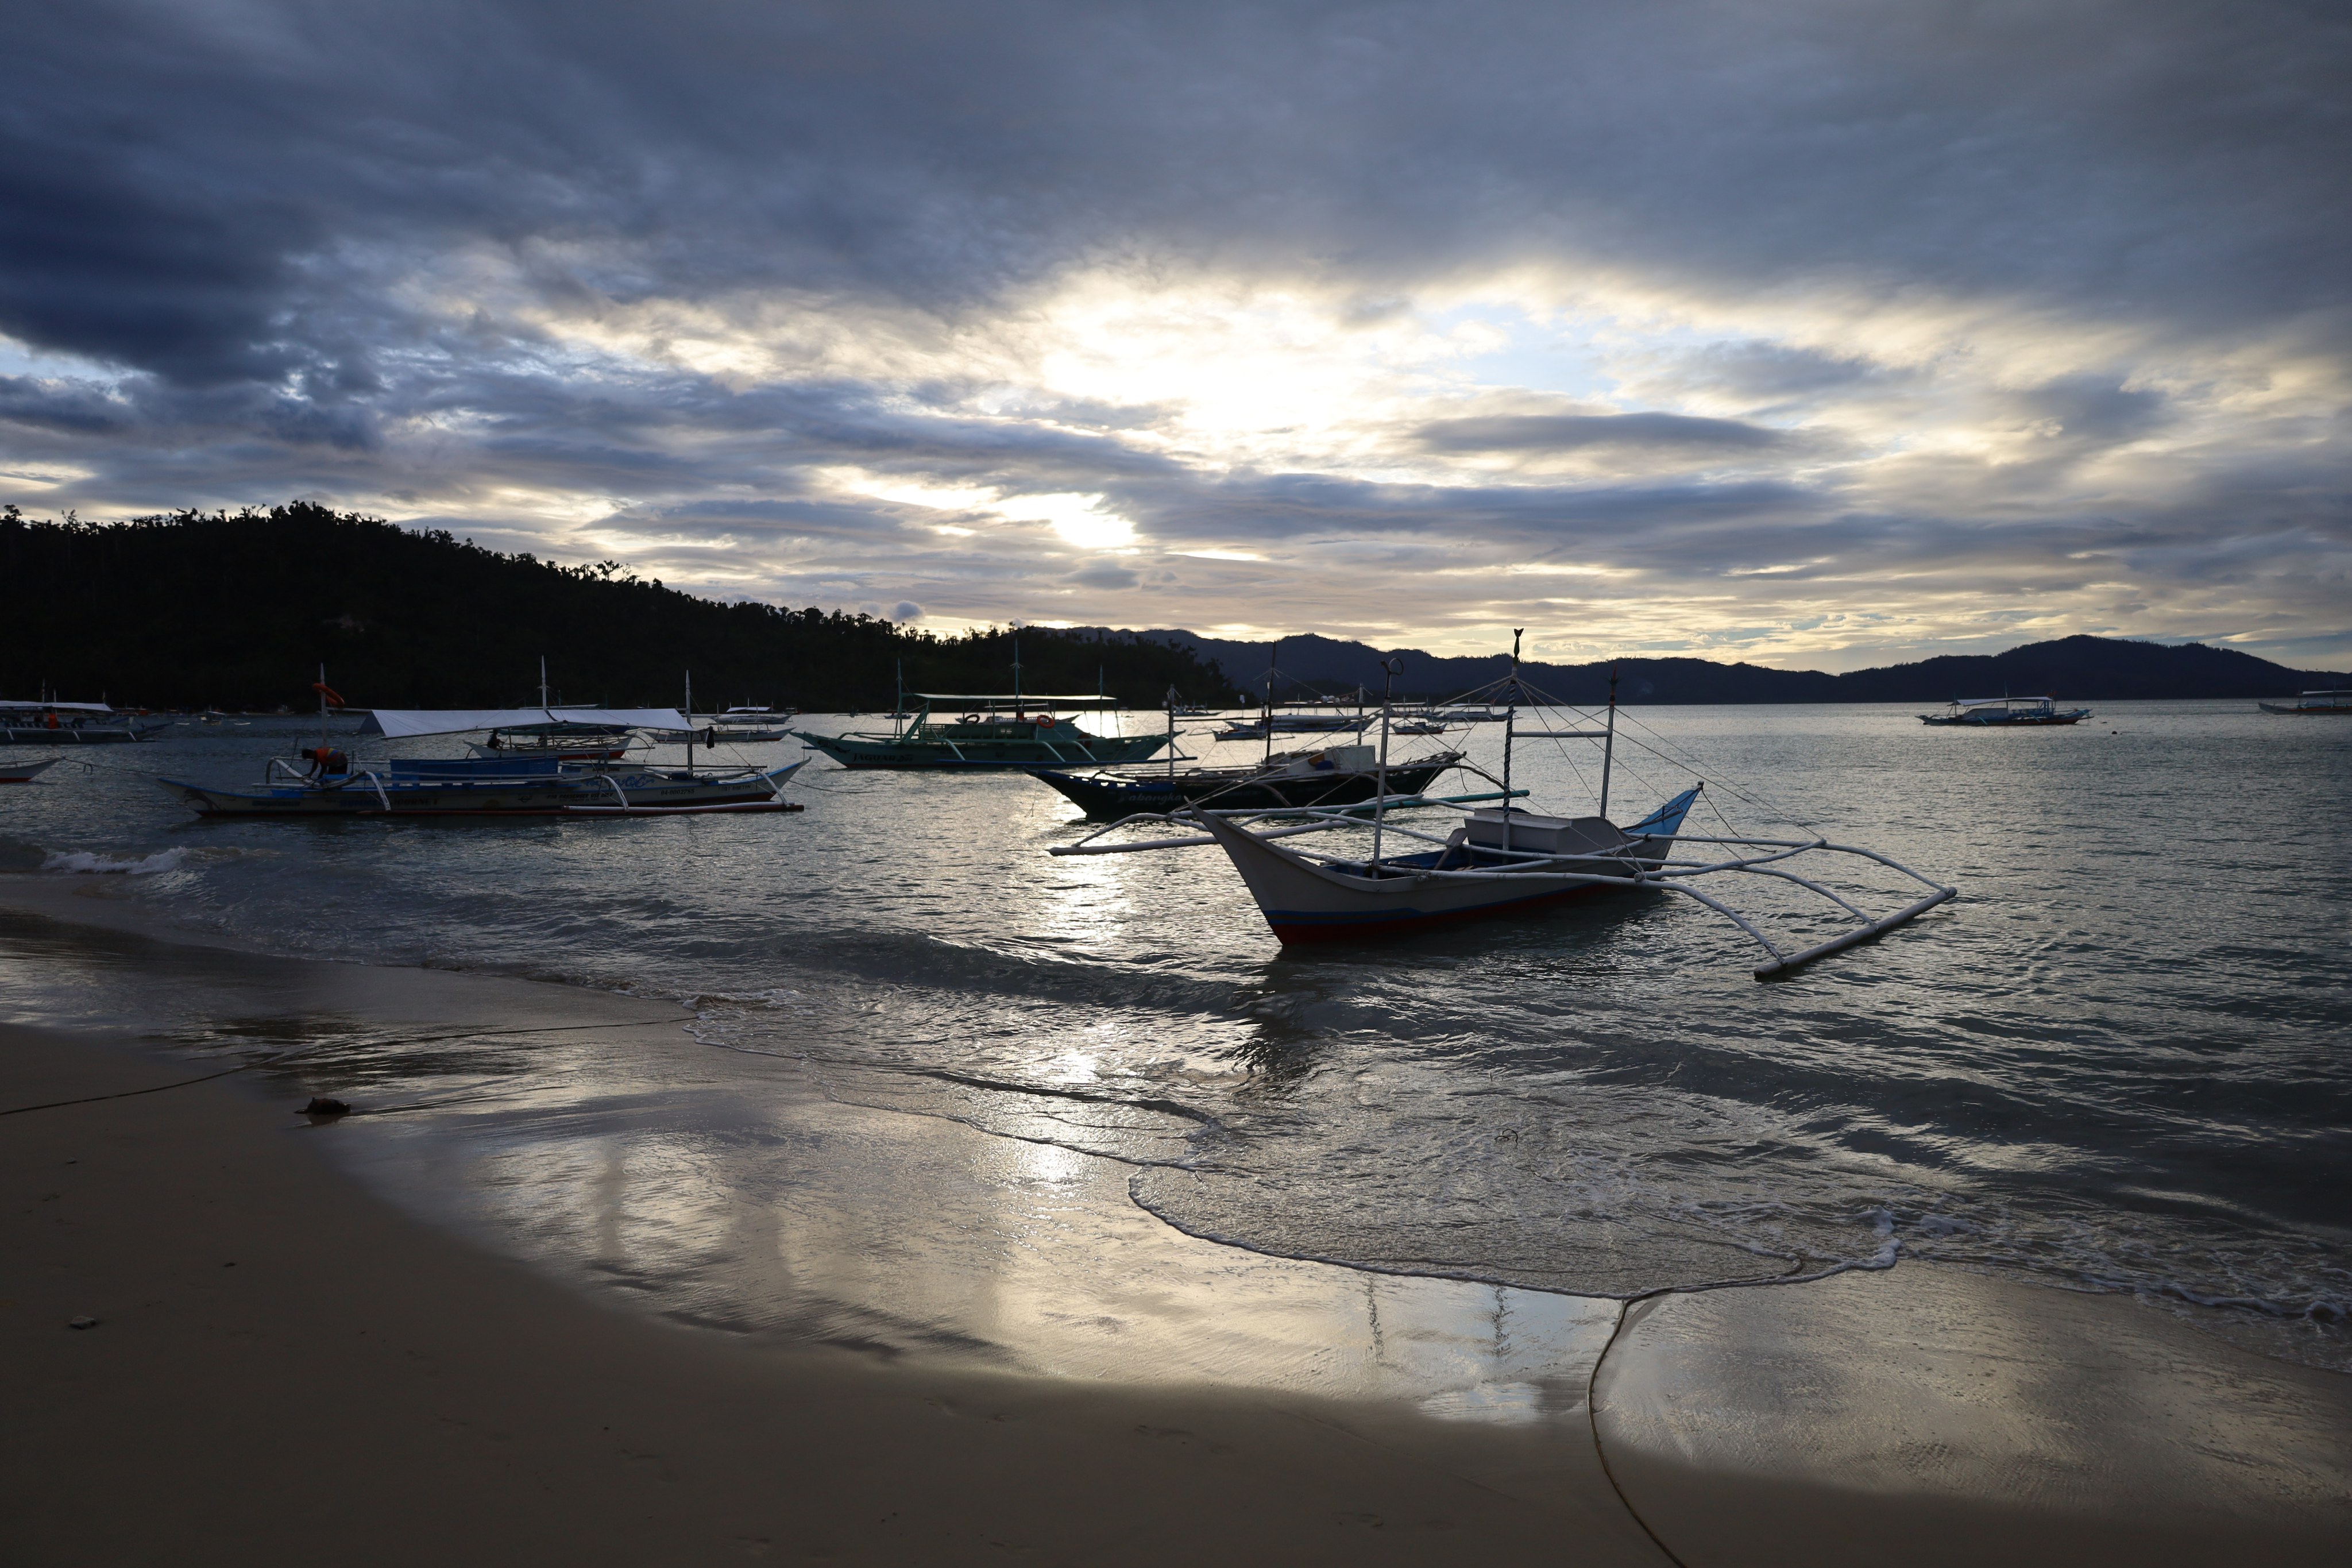 Untouched Port Barton on the west coast of Palawan in the Philippines. Photo: Thomas Bird